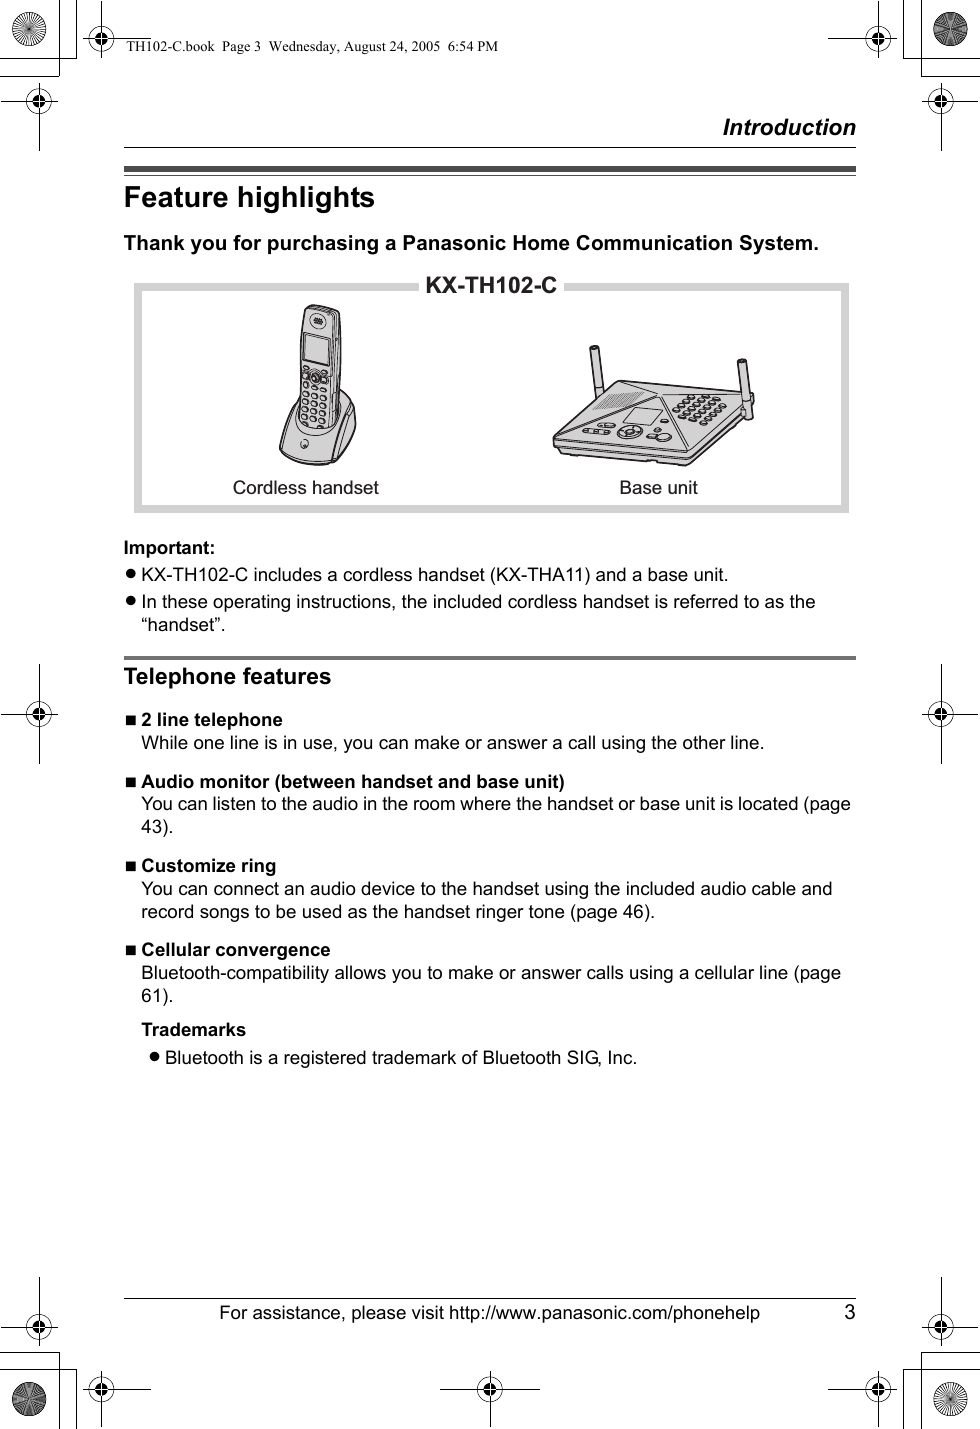 IntroductionFor assistance, please visit http://www.panasonic.com/phonehelp 3Feature highlightsThank you for purchasing a Panasonic Home Communication System.Important:LKX-TH102-C includes a cordless handset (KX-THA11) and a base unit.LIn these operating instructions, the included cordless handset is referred to as the “handset”.Telephone featuresN2 line telephoneWhile one line is in use, you can make or answer a call using the other line.NAudio monitor (between handset and base unit)You can listen to the audio in the room where the handset or base unit is located (page 43).NCustomize ringYou can connect an audio device to the handset using the included audio cable and record songs to be used as the handset ringer tone (page 46).NCellular convergenceBluetooth-compatibility allows you to make or answer calls using a cellular line (page 61).TrademarksLBluetooth is a registered trademark of Bluetooth SIG, Inc.KX-TH102-CCordless handset Base unitTH102-C.book  Page 3  Wednesday, August 24, 2005  6:54 PM